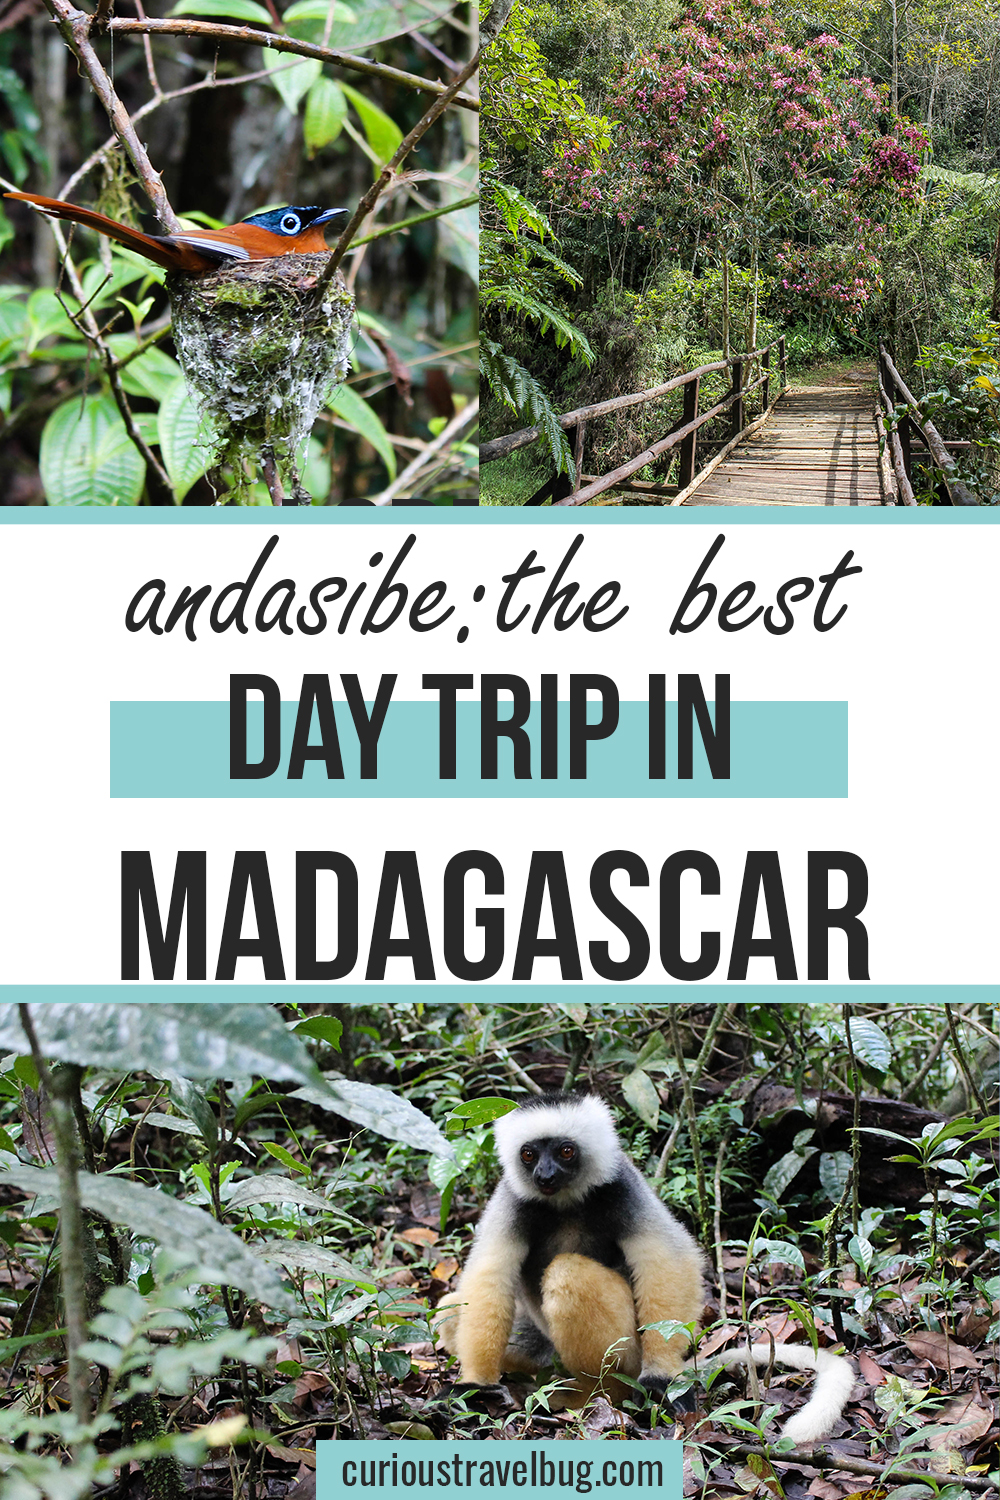 Andasibe National Park makes for the perfect day trip from Antananarivo, the capital. If you are looking to see lemurs, chameleons, and more, this is a great place for a quick hike to see the wildlife of Madagascar. Madagascar travel